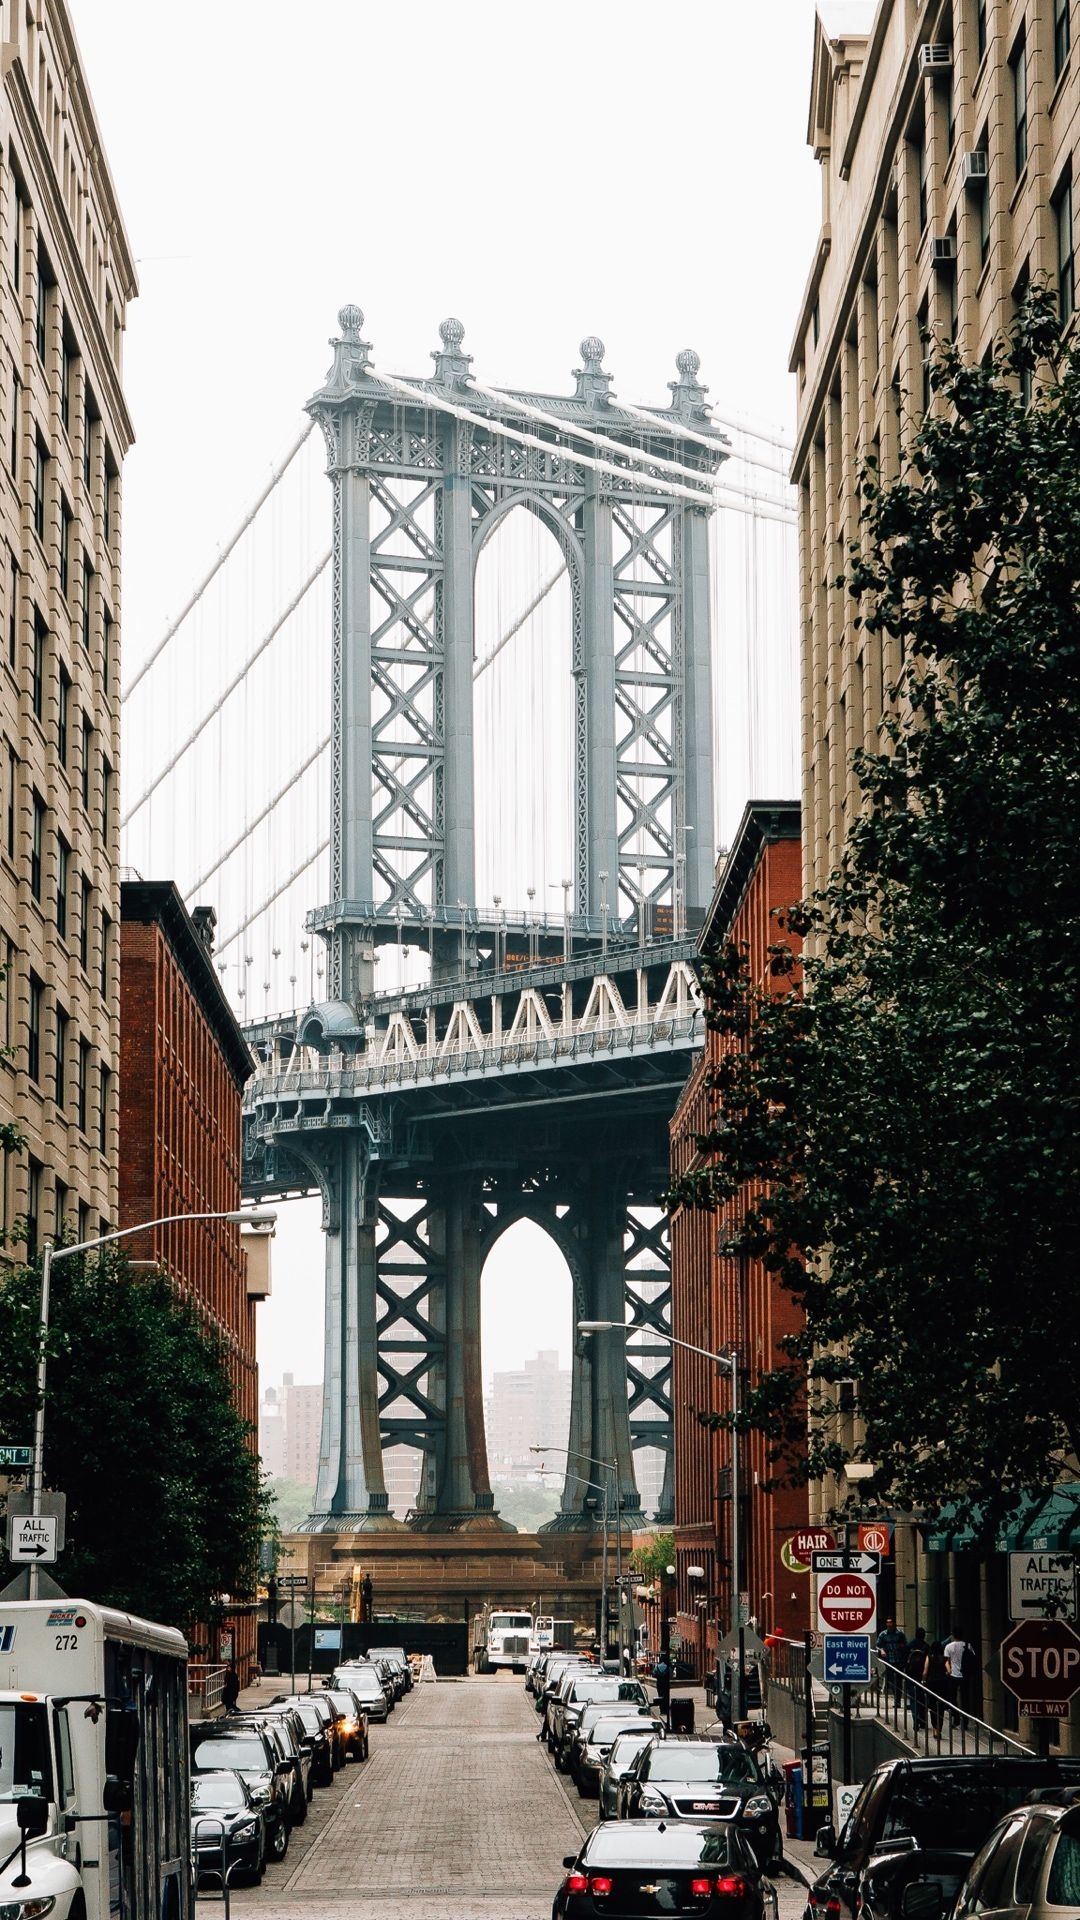 New York, NYC iPhone wallpapers, Urban streets, City vibes, 1080x1920 Full HD Handy